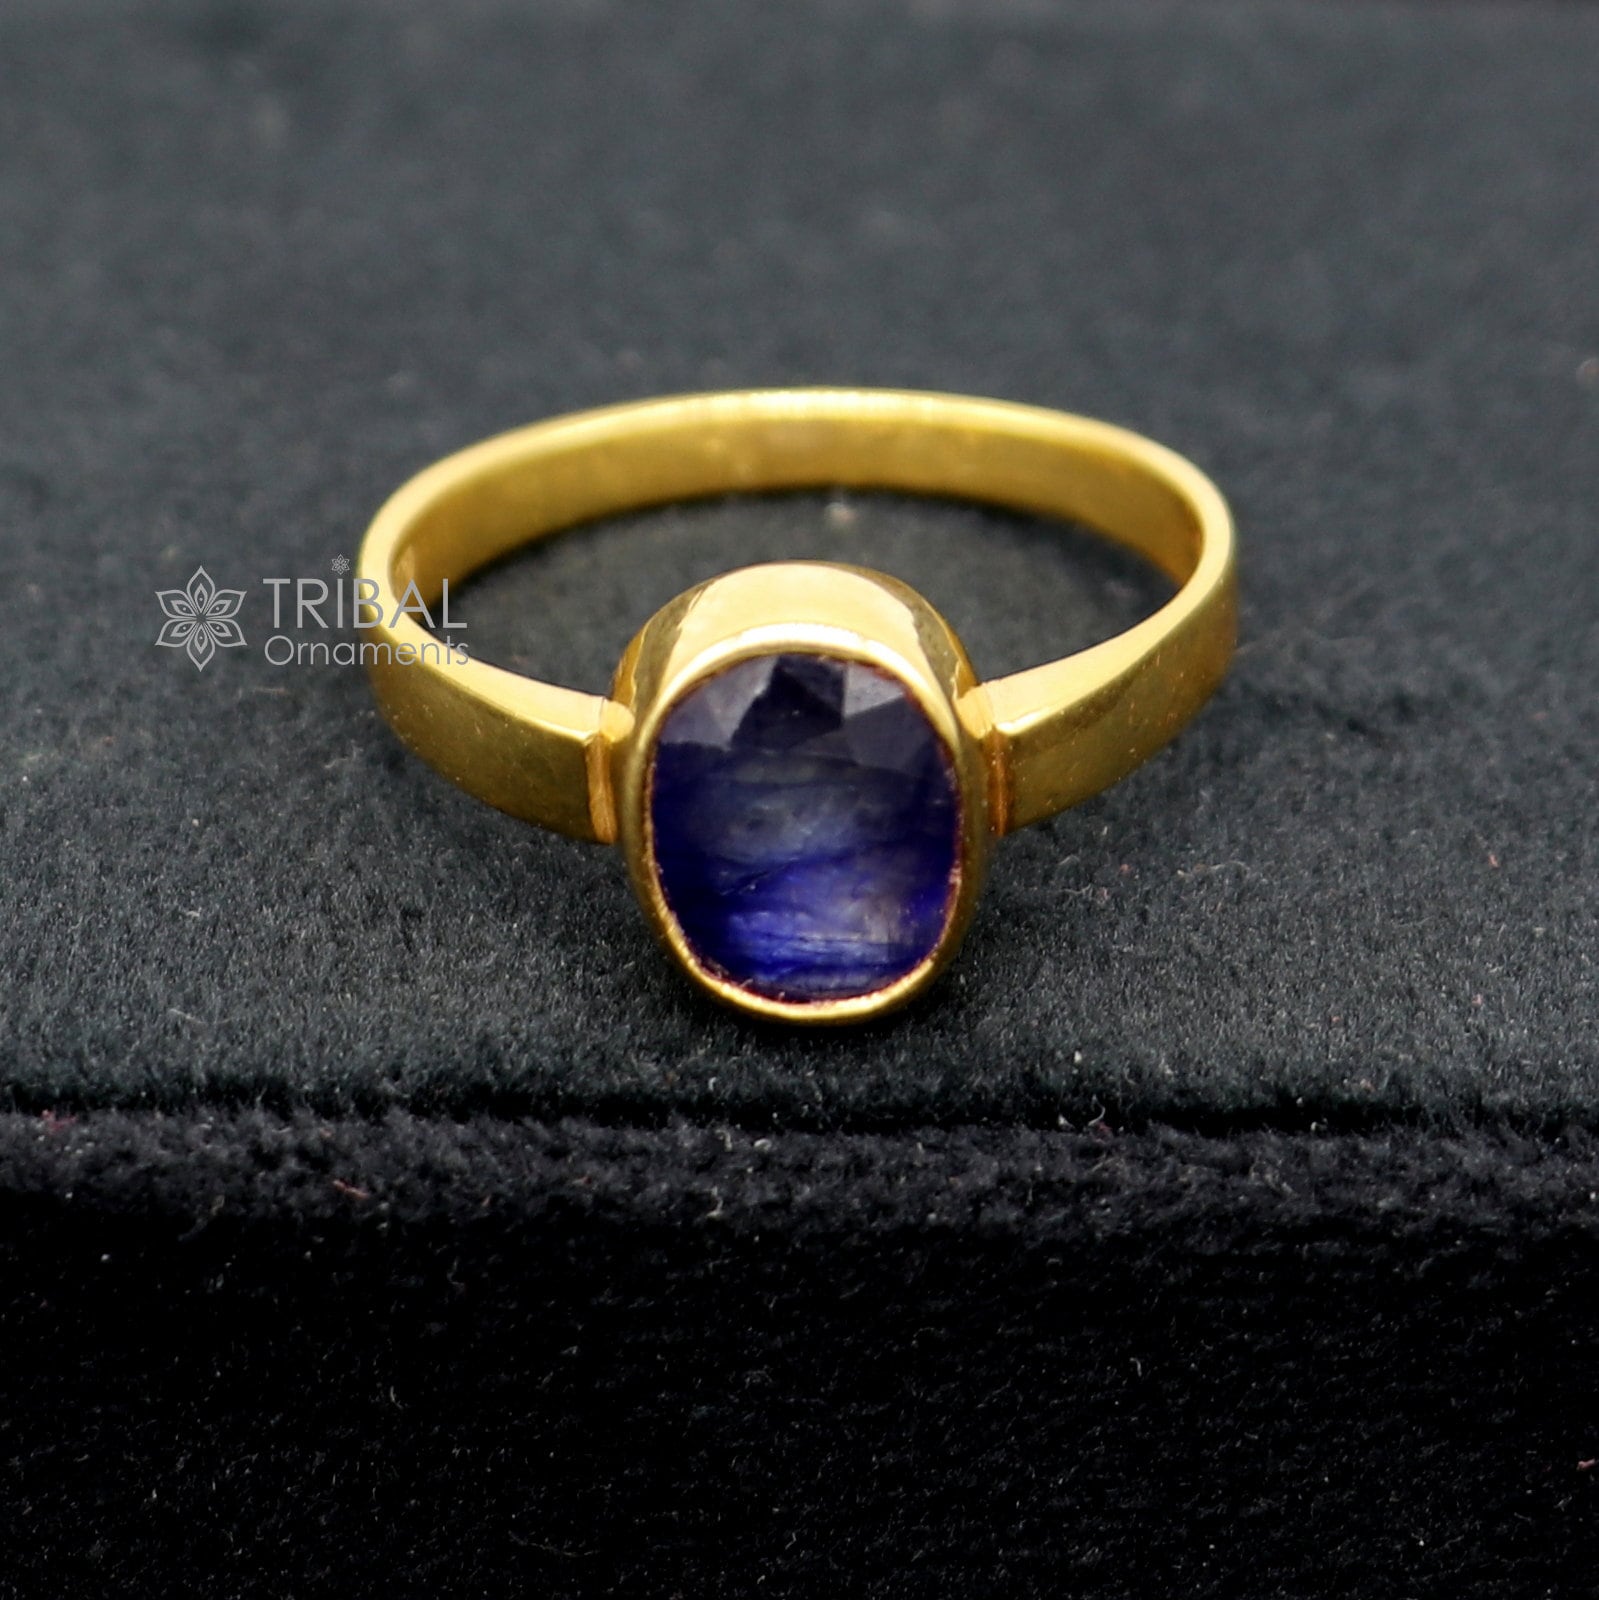 Diana Sapphire Ring 18K Yellow Gold Oval Blue Sapphire and Diamonds, Unique Engagement  Ring, Anniversary Ring, Rings for Women, Gift for Her - Etsy